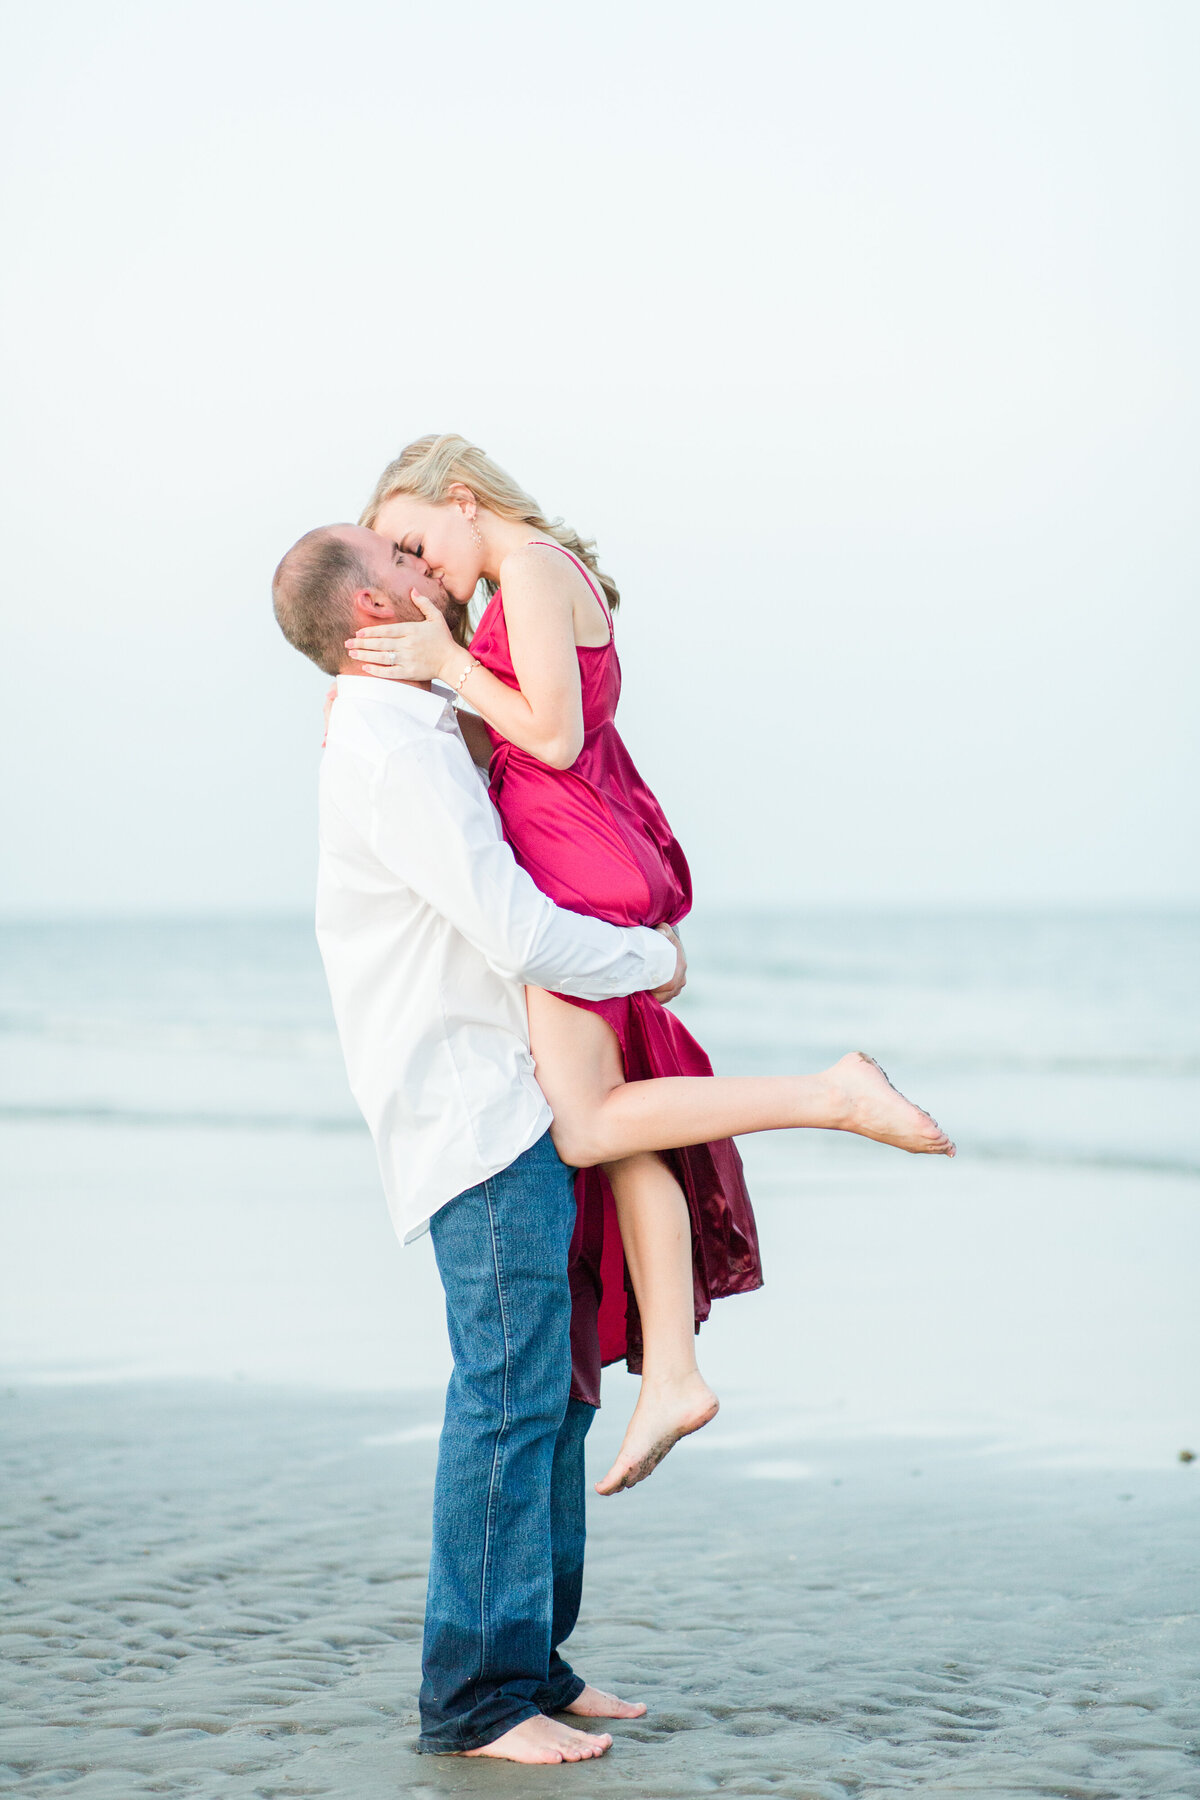 Renee Lorio Photography South Louisiana Wedding Engagement Light Airy Portrait Photographer Photos Southern Clean Colorful16444